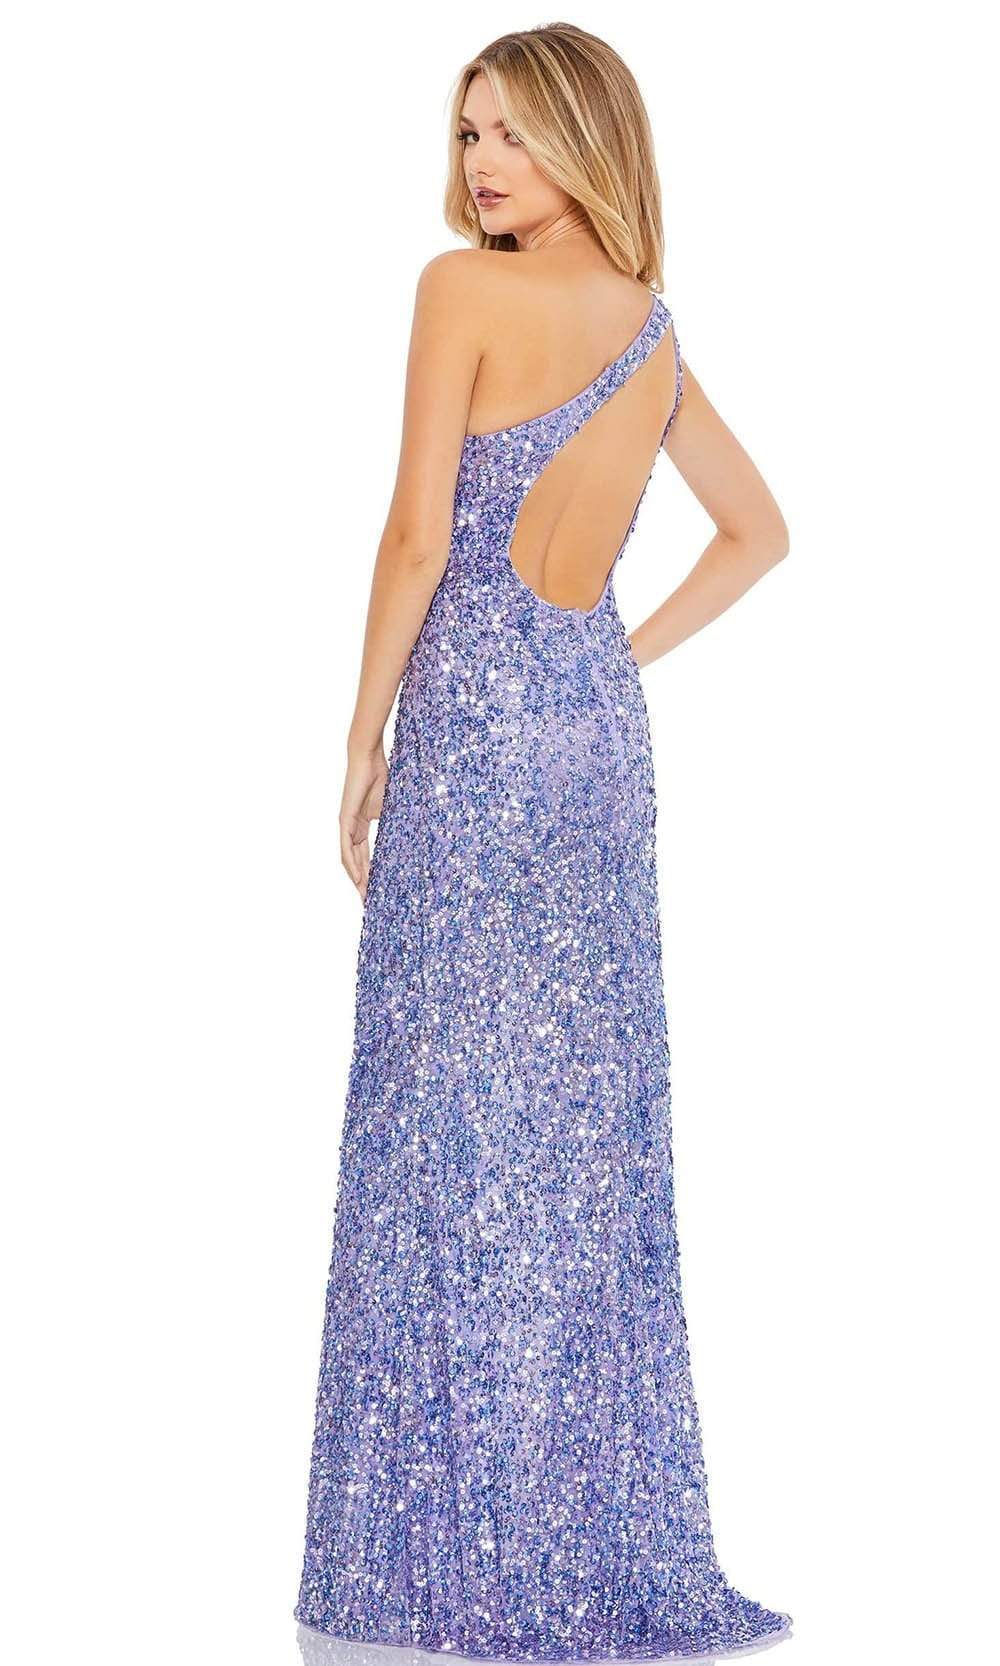 Mac Duggal - Sequin-Ornate Cutout Sheath Dress 43361 - 1 pc Lilac In Size 0 Available CCSALE 0 / Lilac